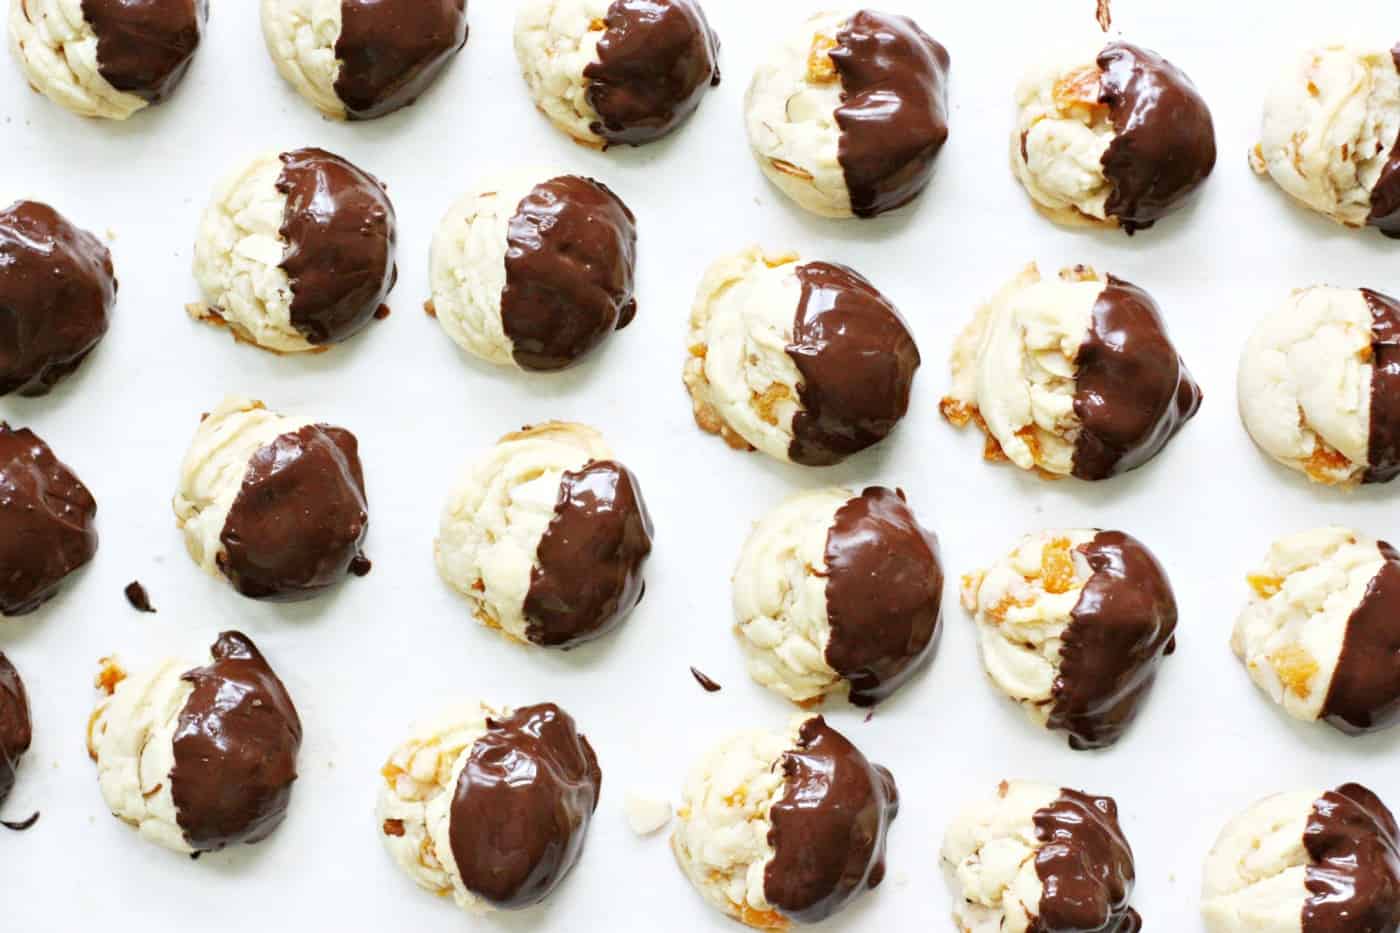 Apricot cookies dipped in chocolate